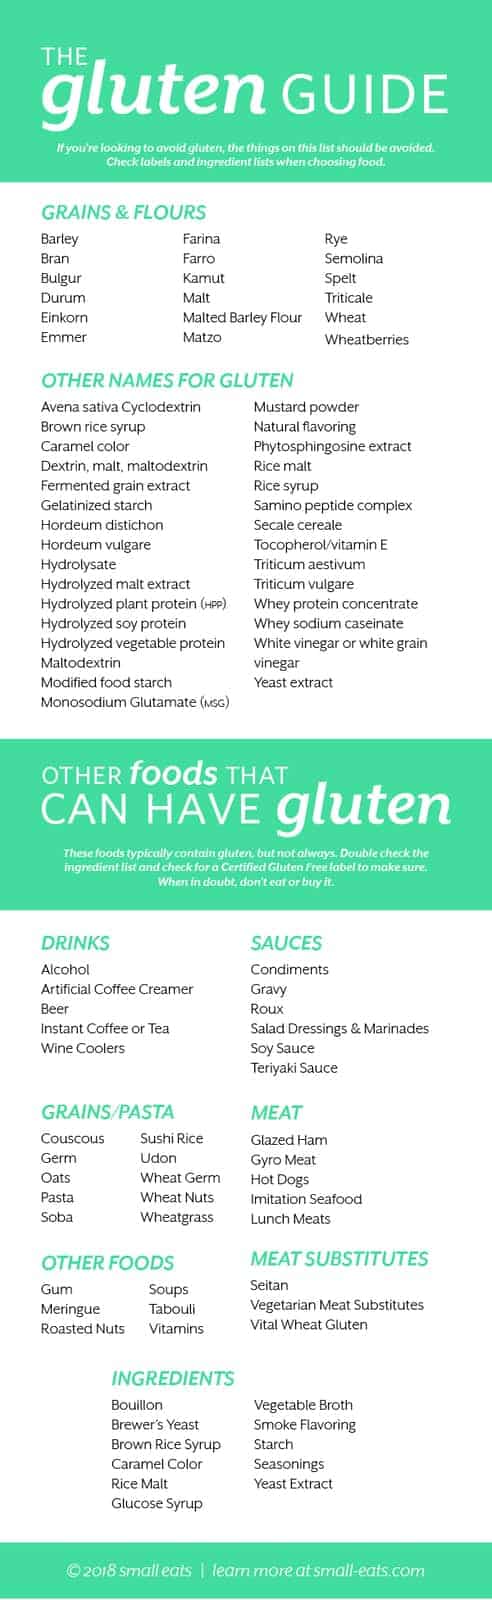 Learn what foods contain gluten and usually contain gluten. A handy and pinnable graphic helps you quickly figure out what to watch out for when you're shopping. | The Gluten Guide (with a handy chart) from small-eats.com